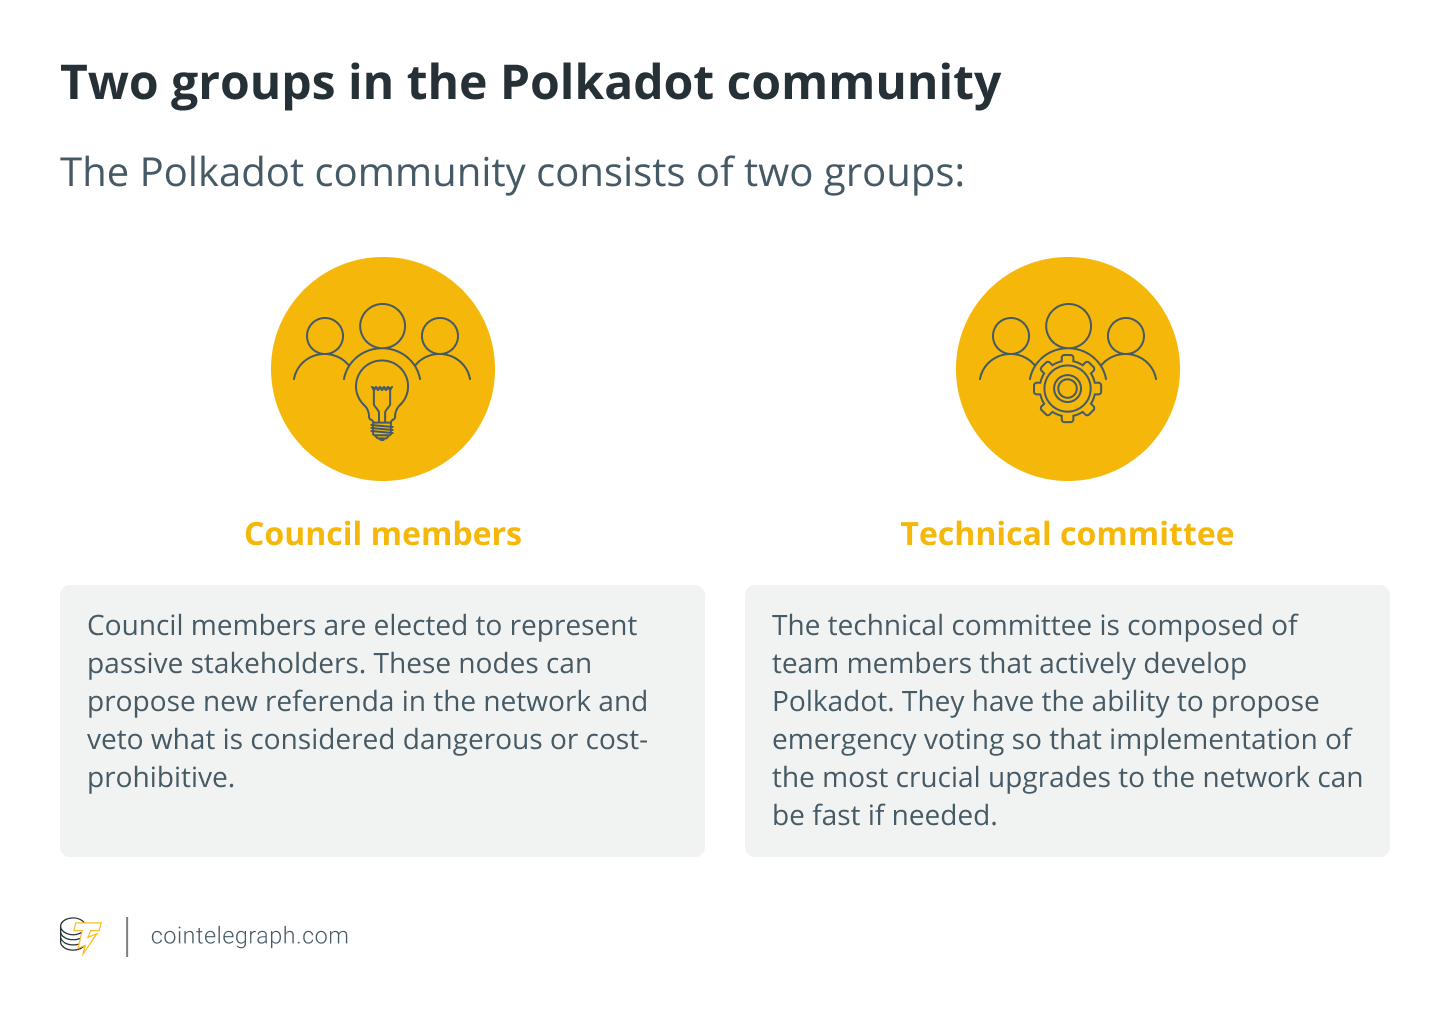 Two groups in the Polkadot community